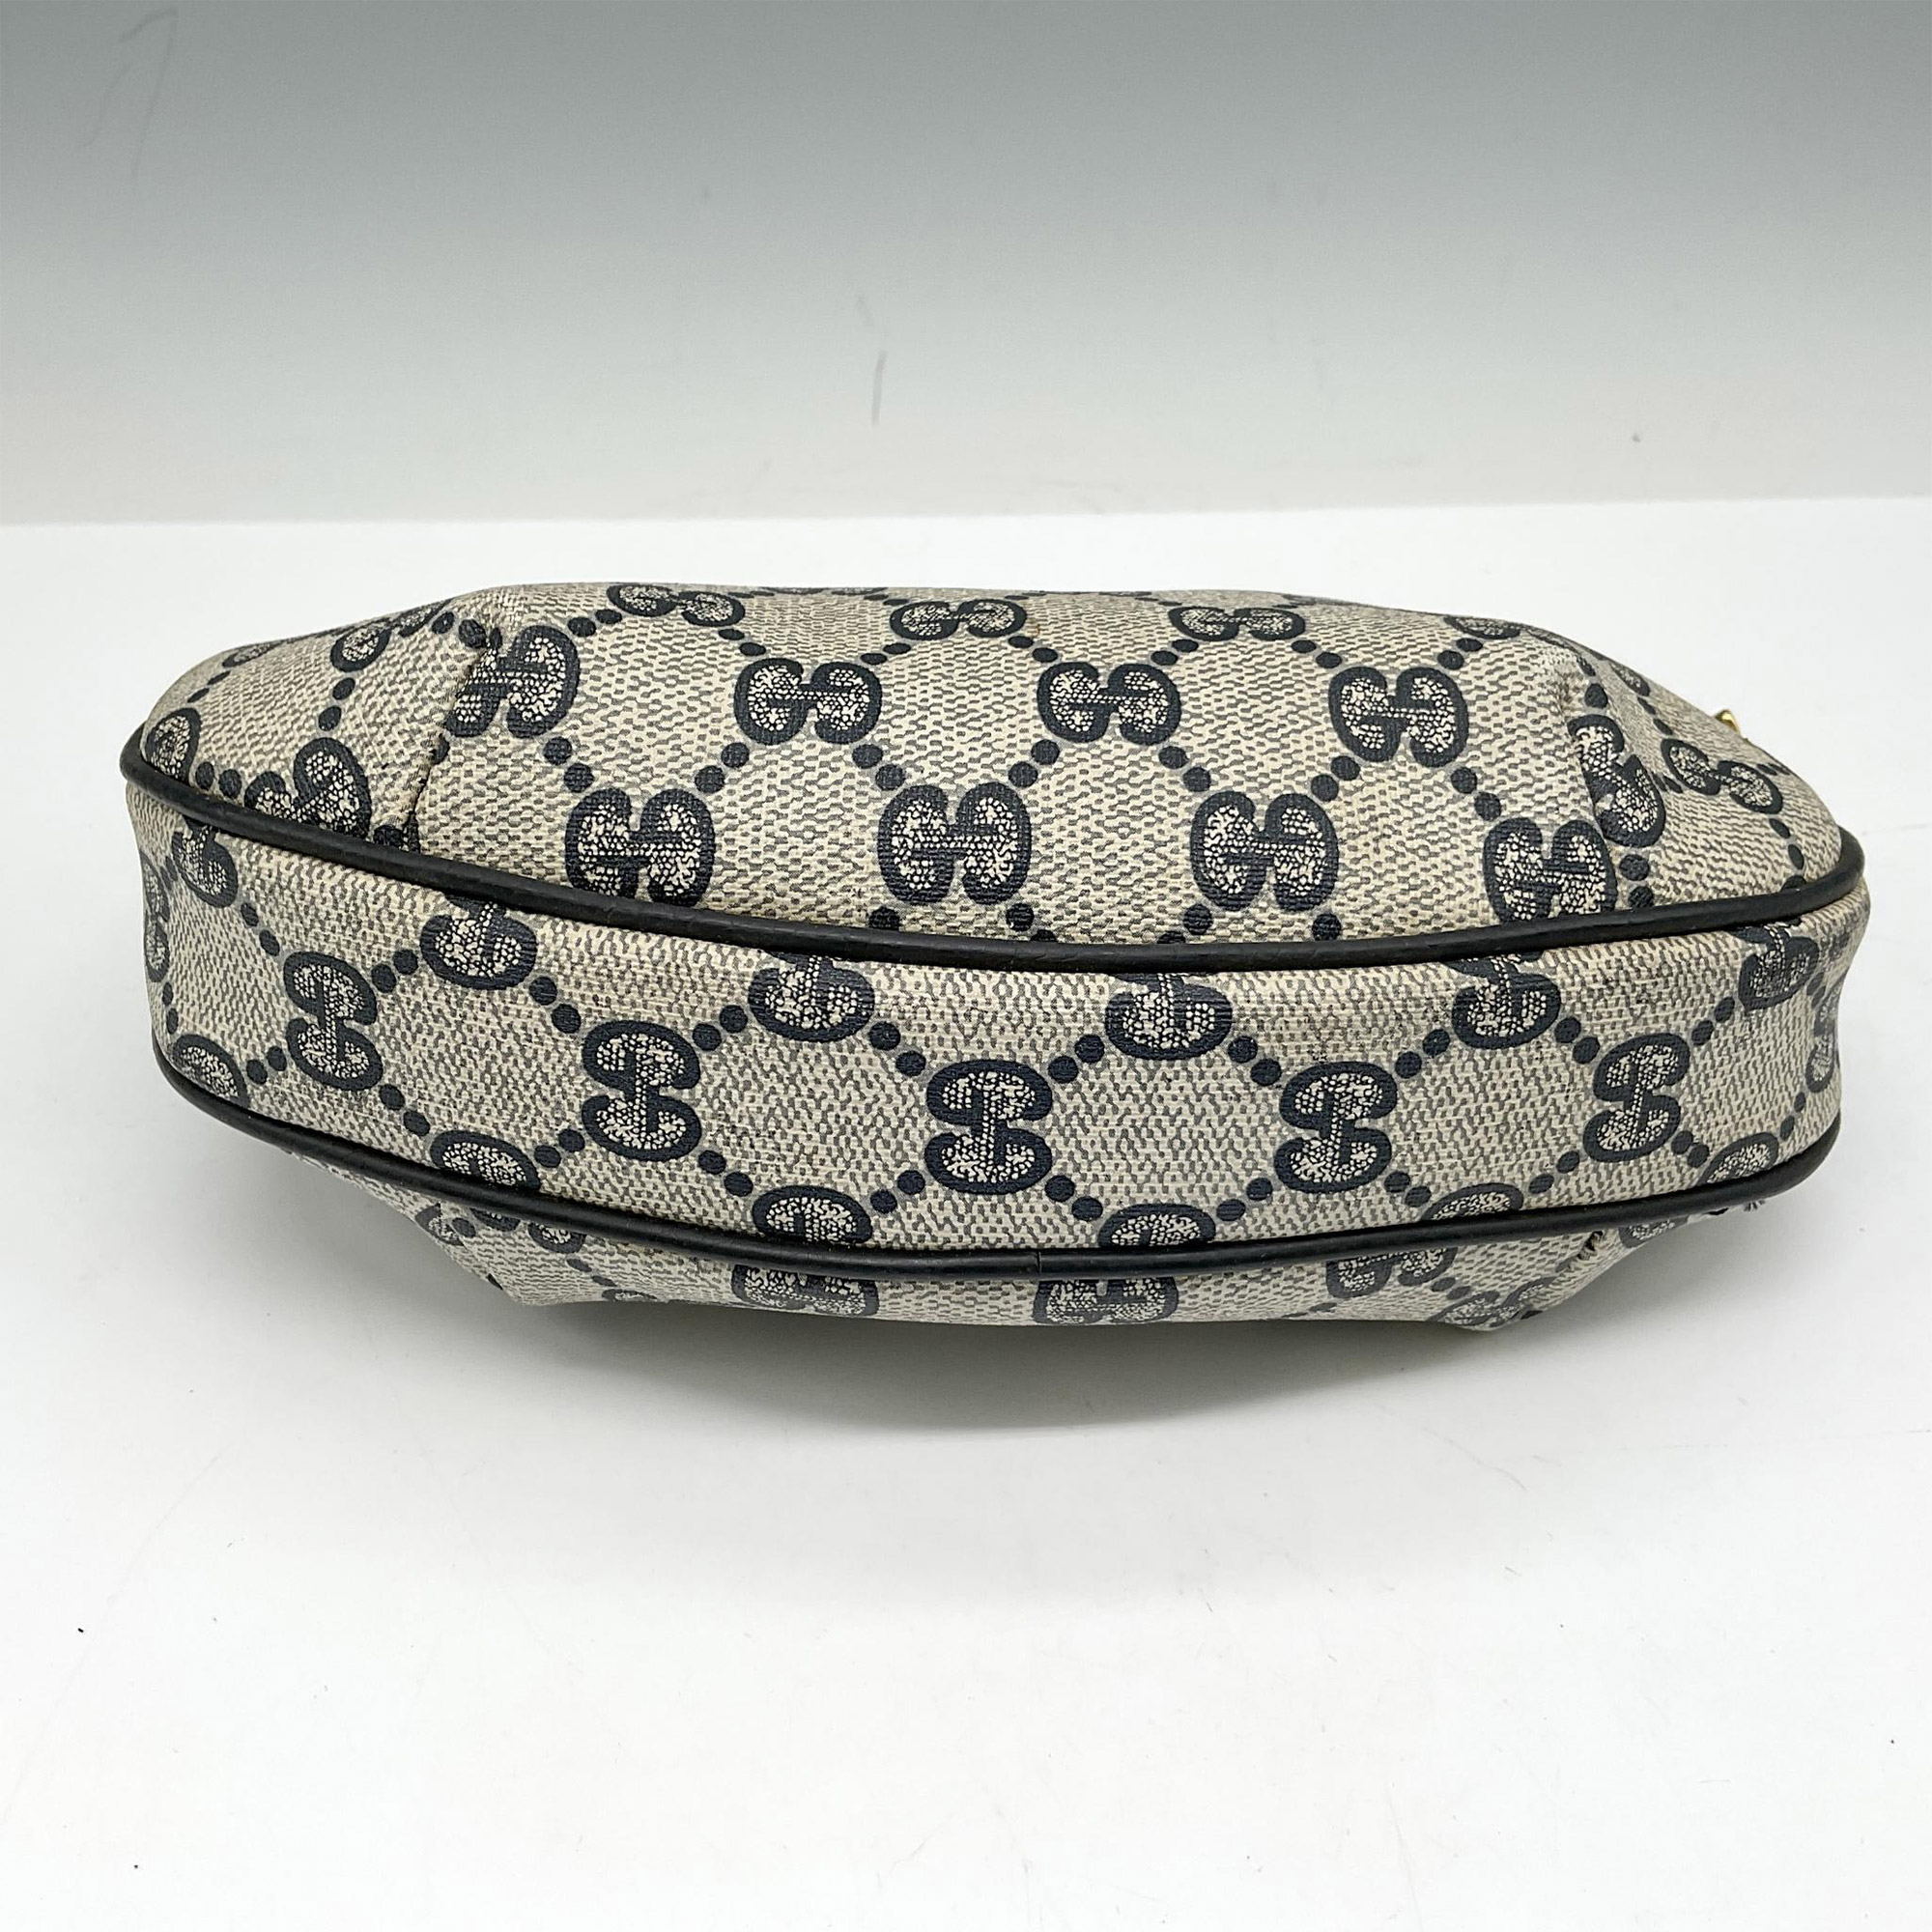 Gucci Zippered Clutch Bag - Image 3 of 4